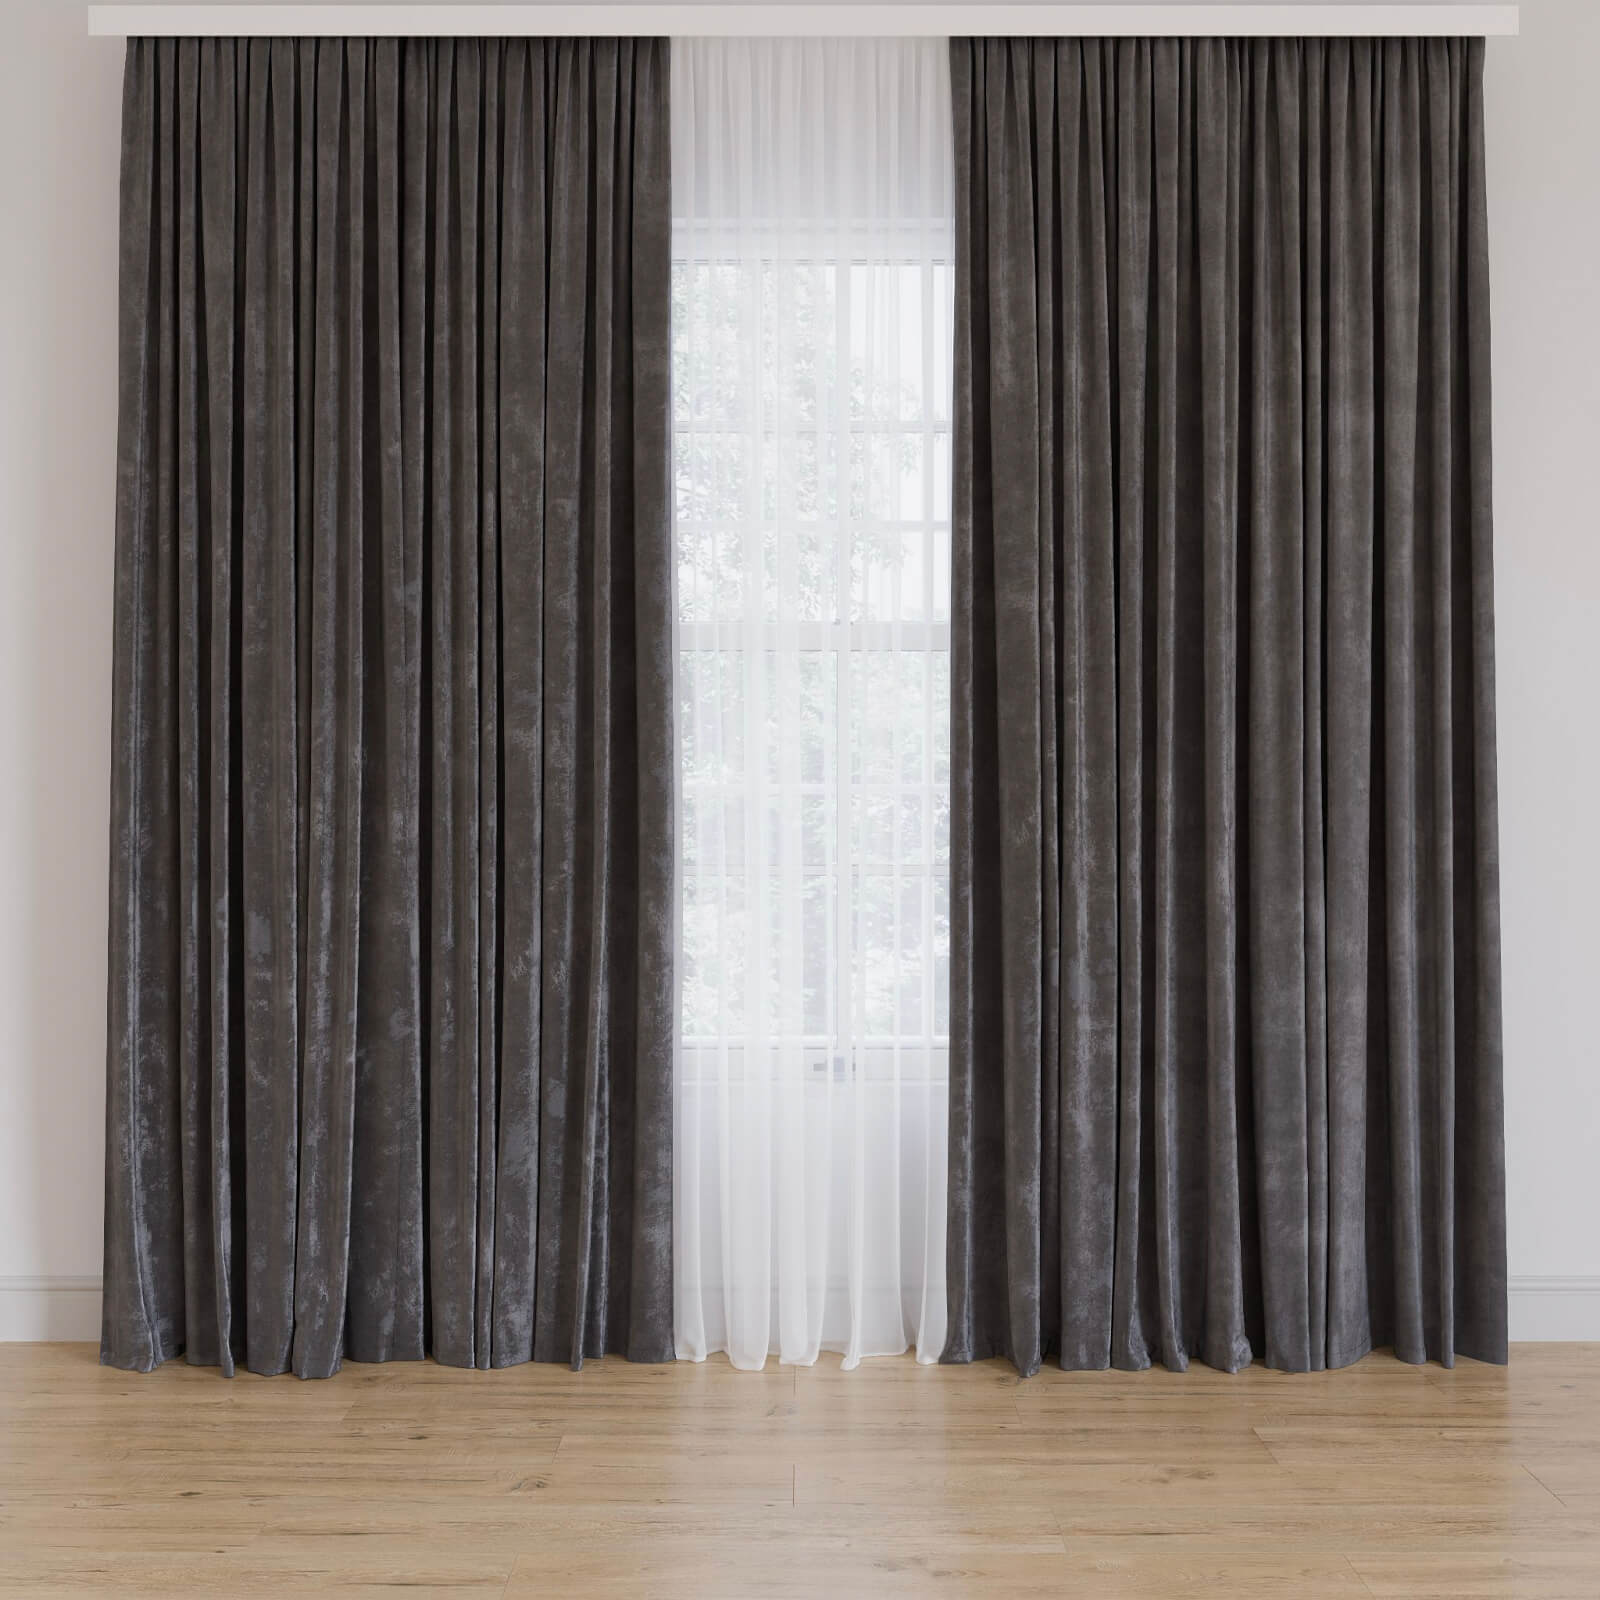 3D Visualization of Fabric for Gray Curtains